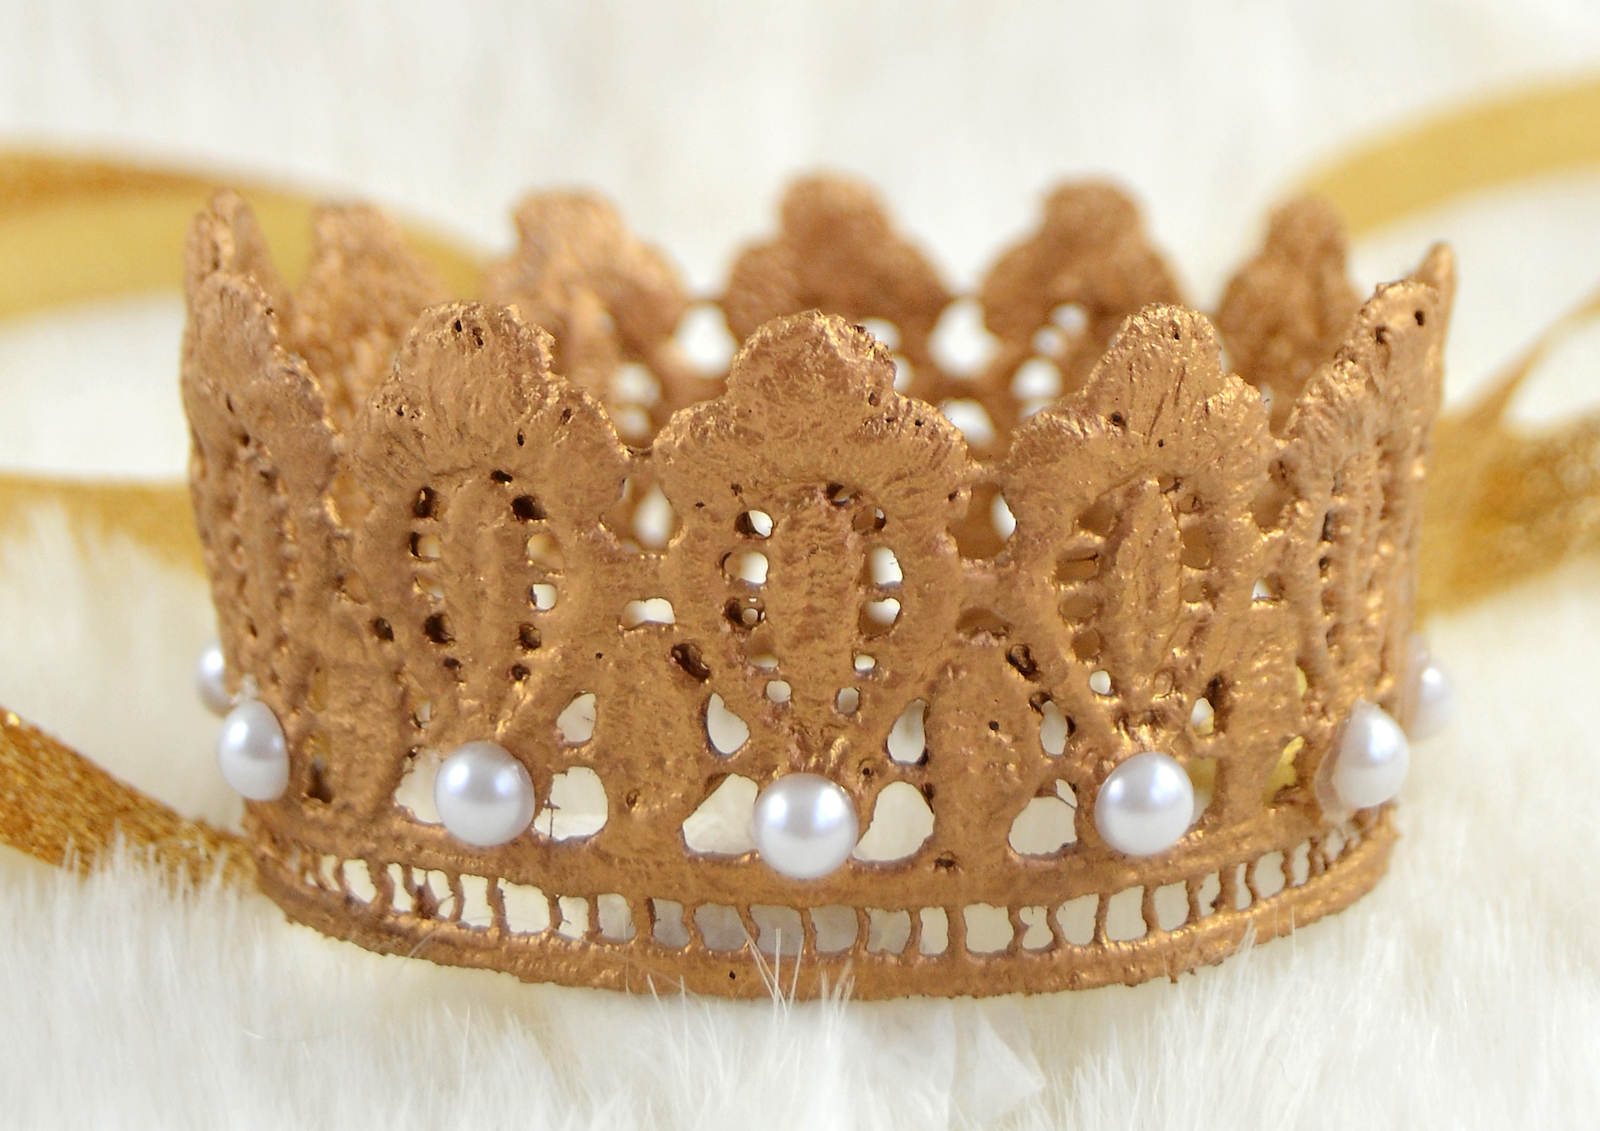 Make a DIY crown with lace